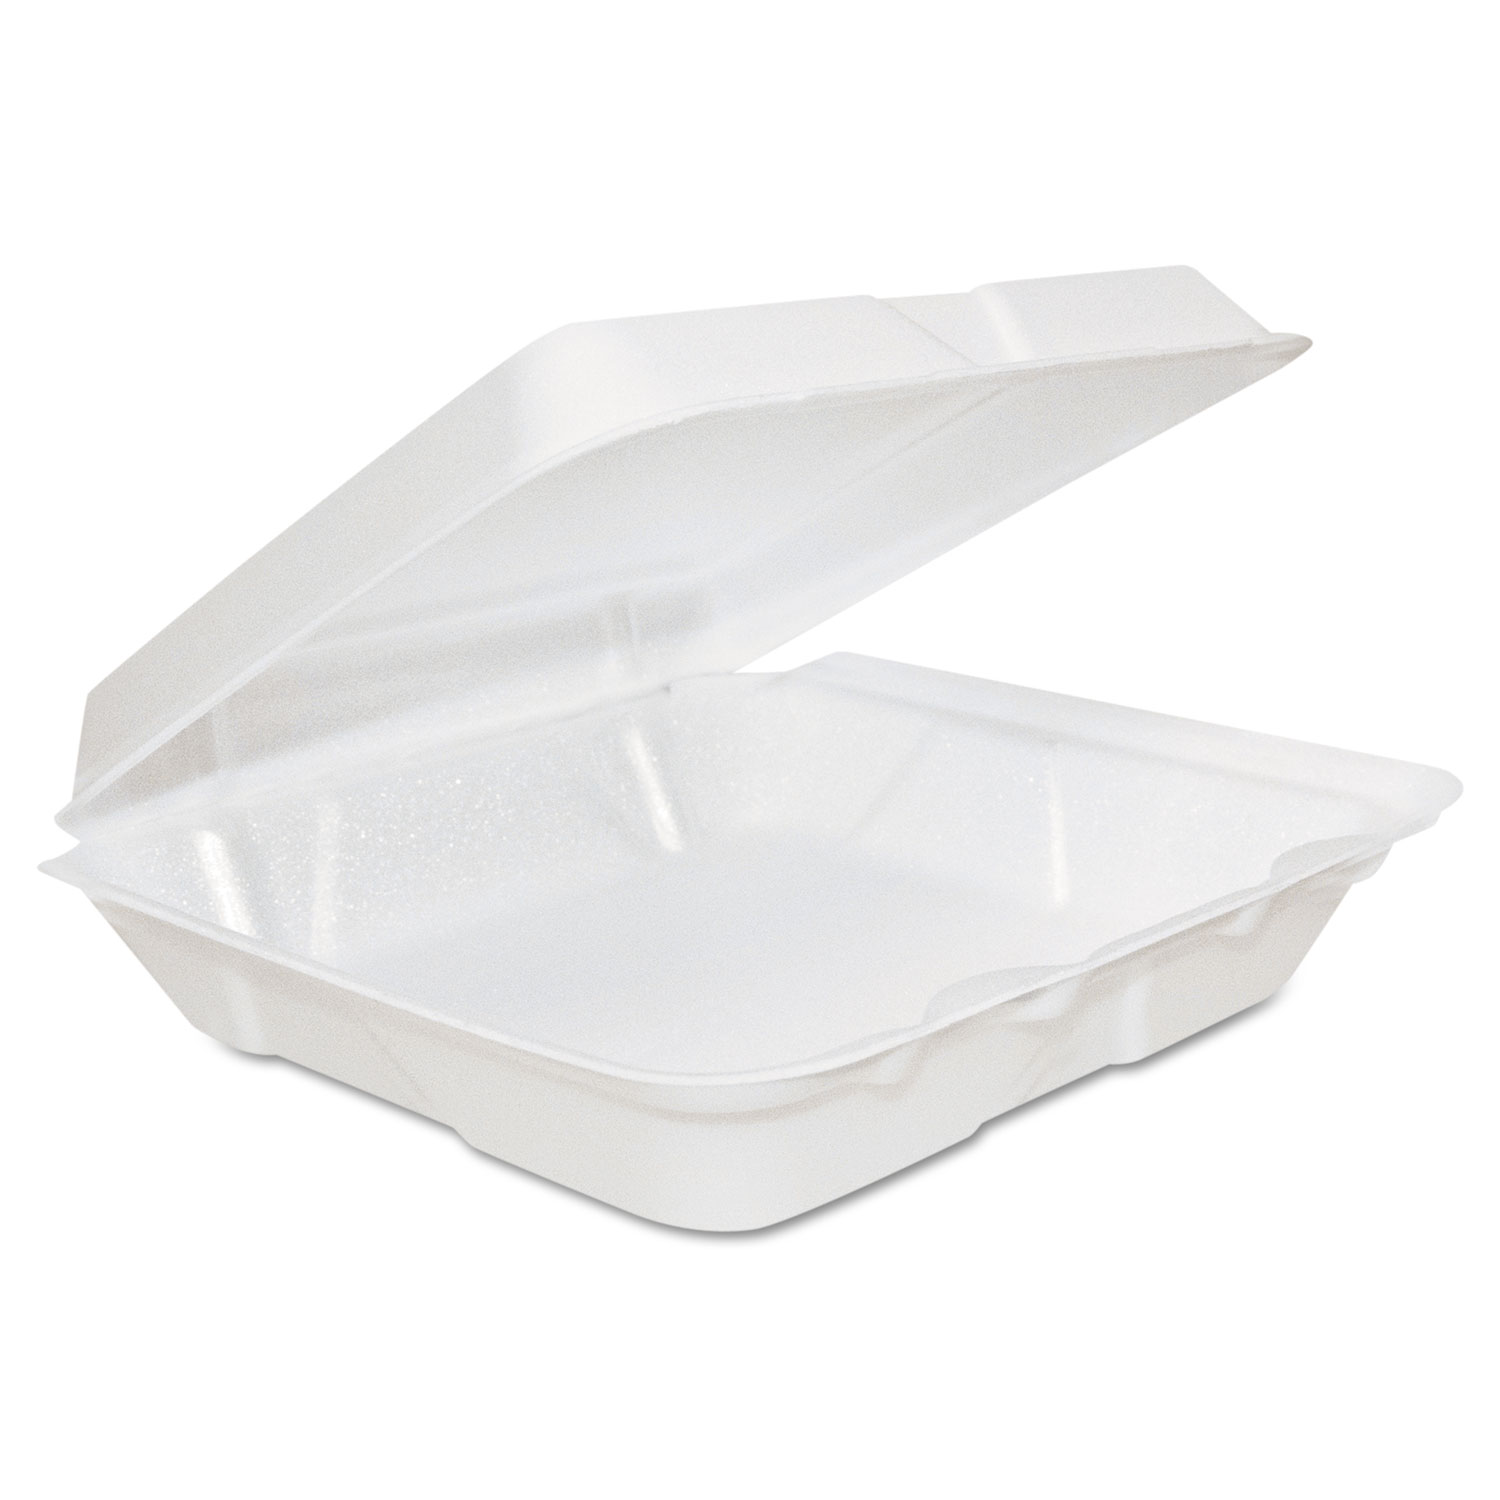  Dart 80HT1R Foam Hinged Lid Containers, 8 x 8 x 2 1/4, White, 200/Carton (DCC80HT1R) 